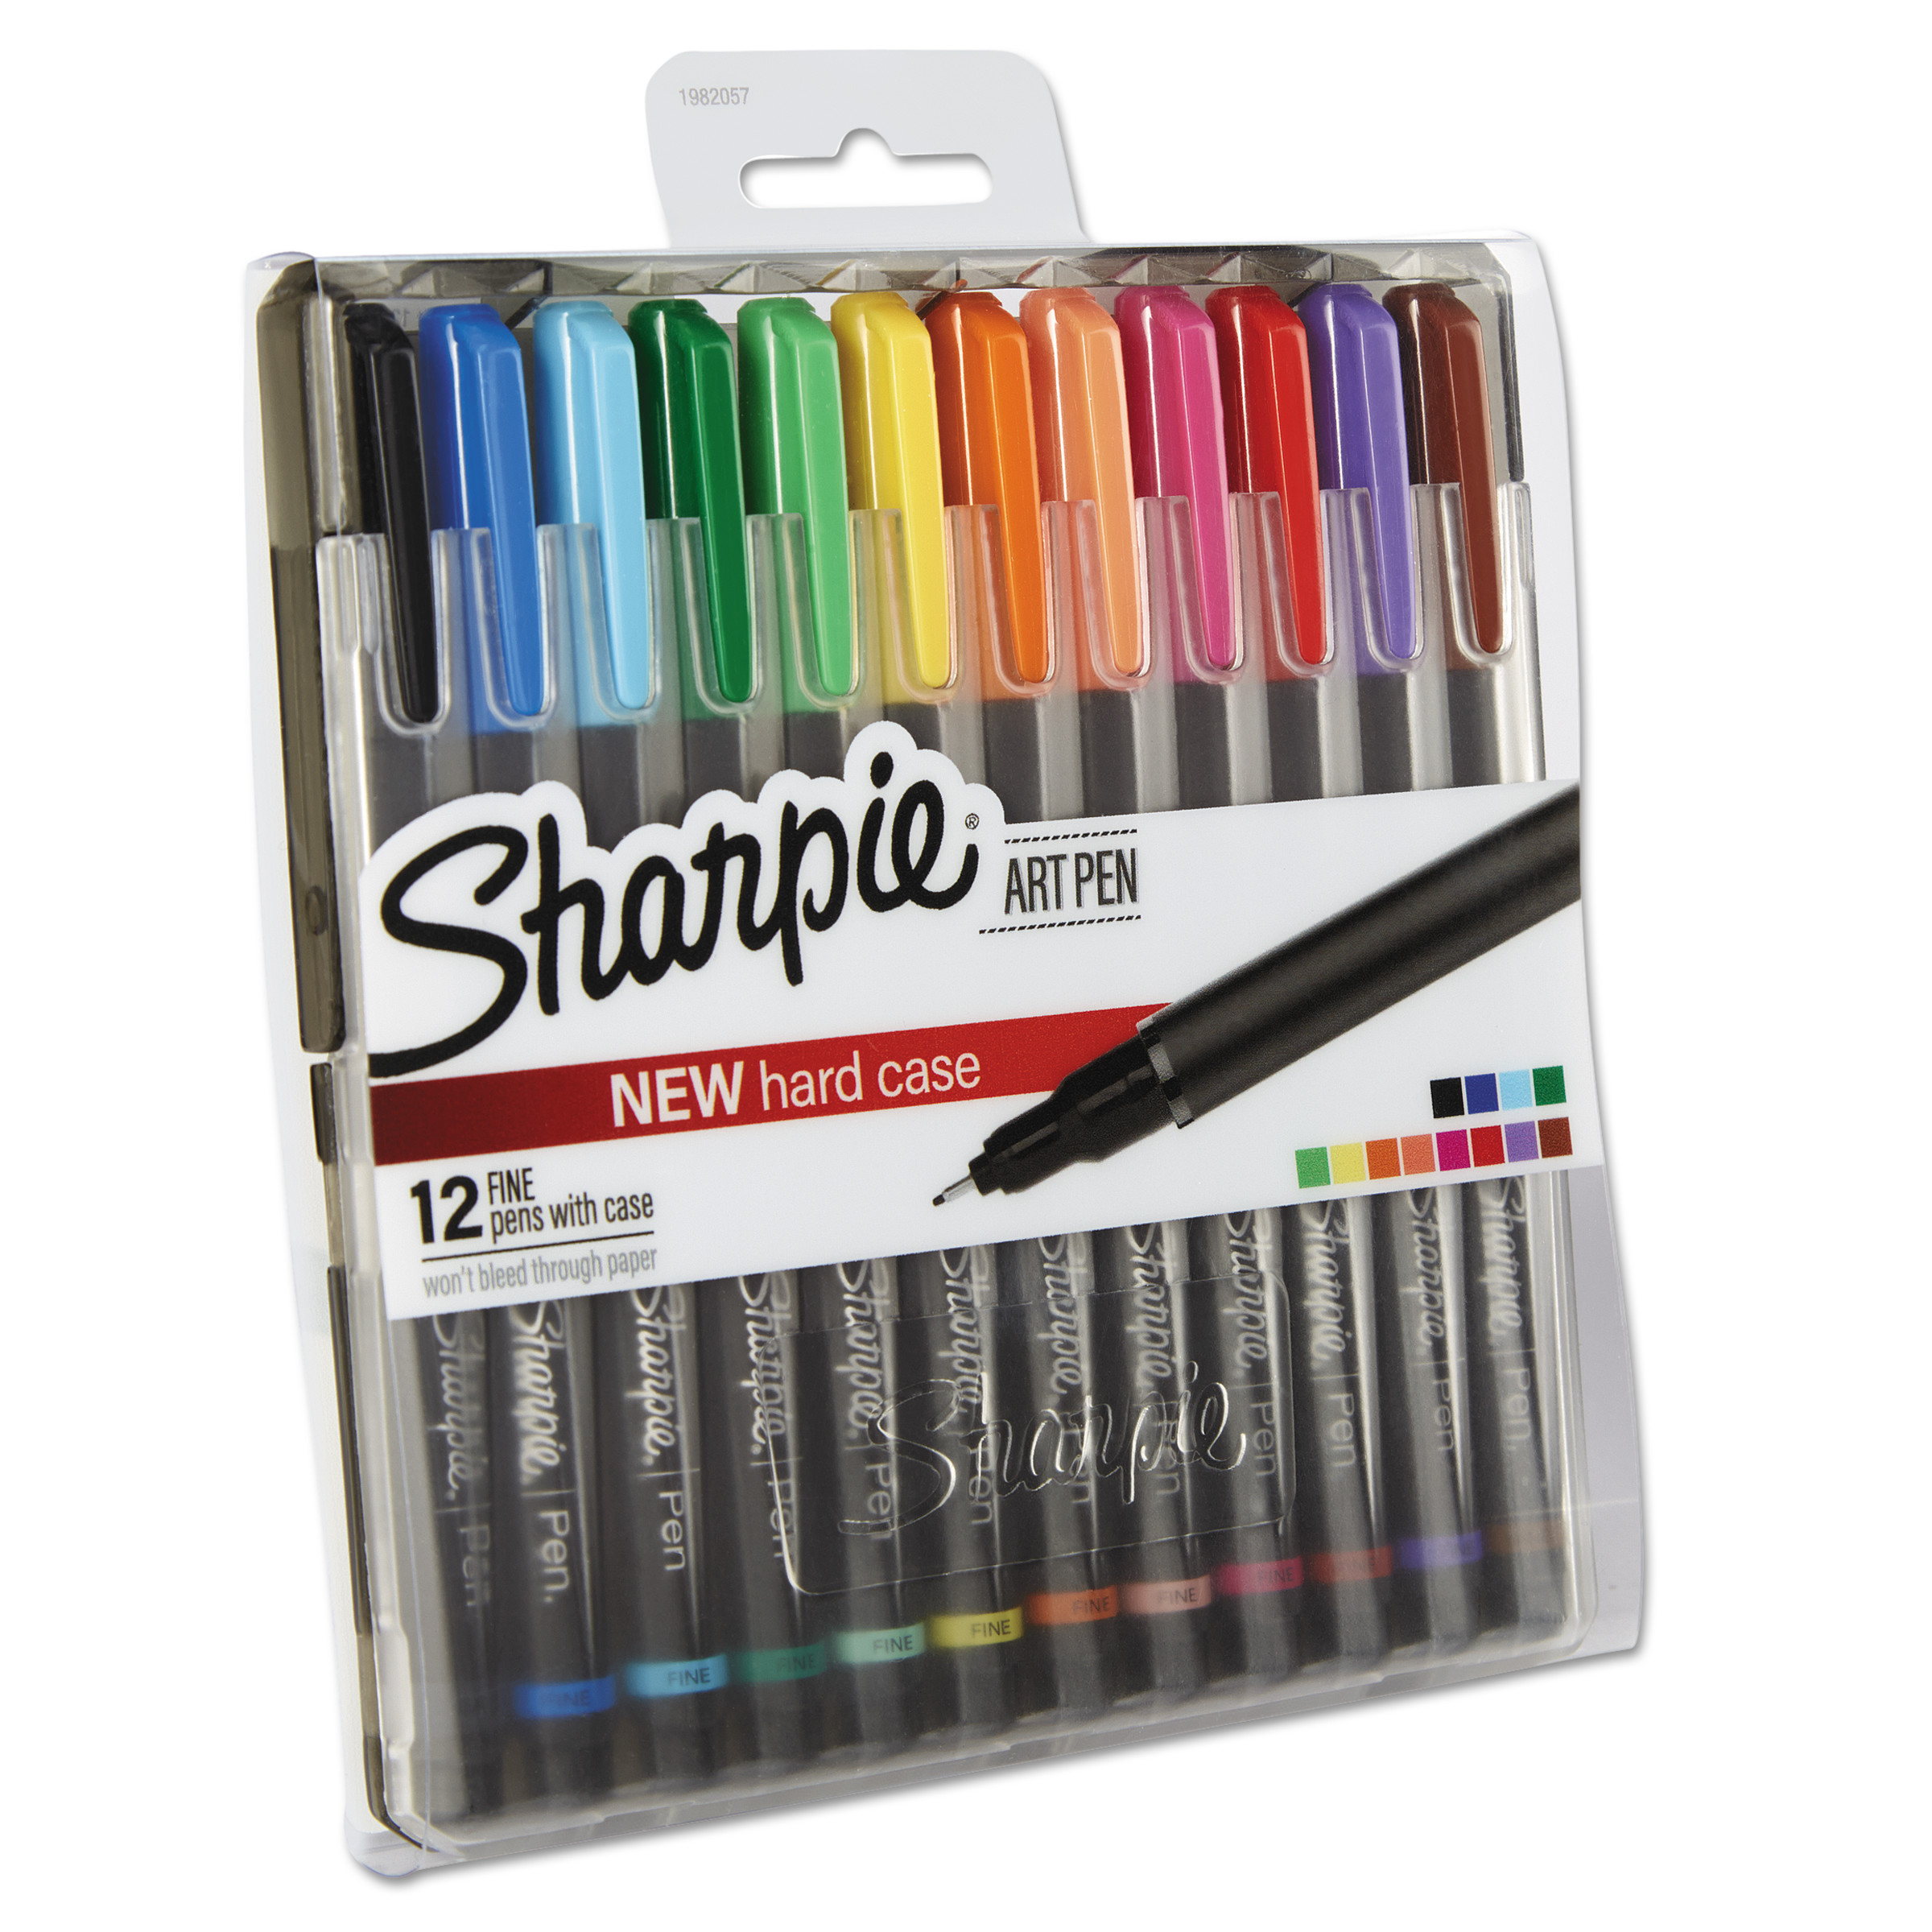 Sharpie Assorted Fine Point Drawing Pen Set, 12 Pieces - image 1 of 8